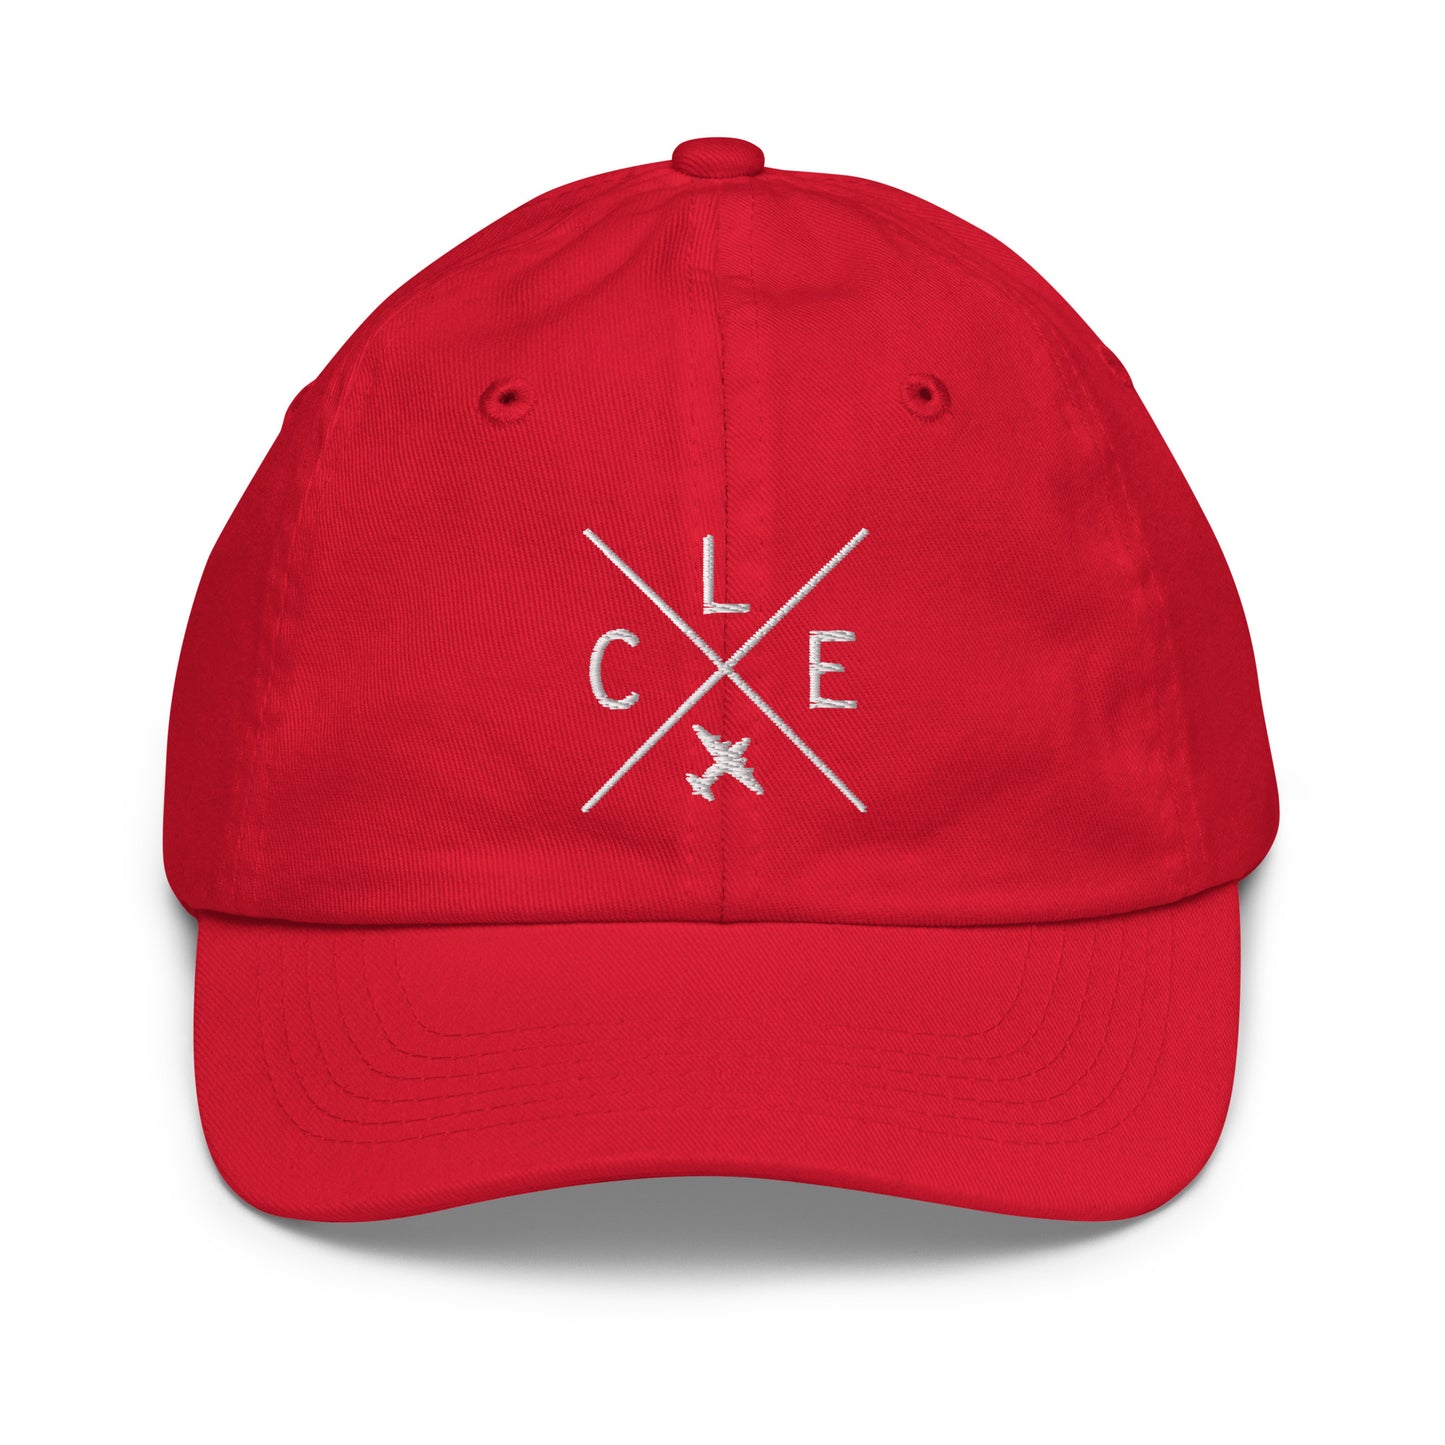 Crossed-X Kid's Baseball Cap - White • CLE Cleveland • YHM Designs - Image 17